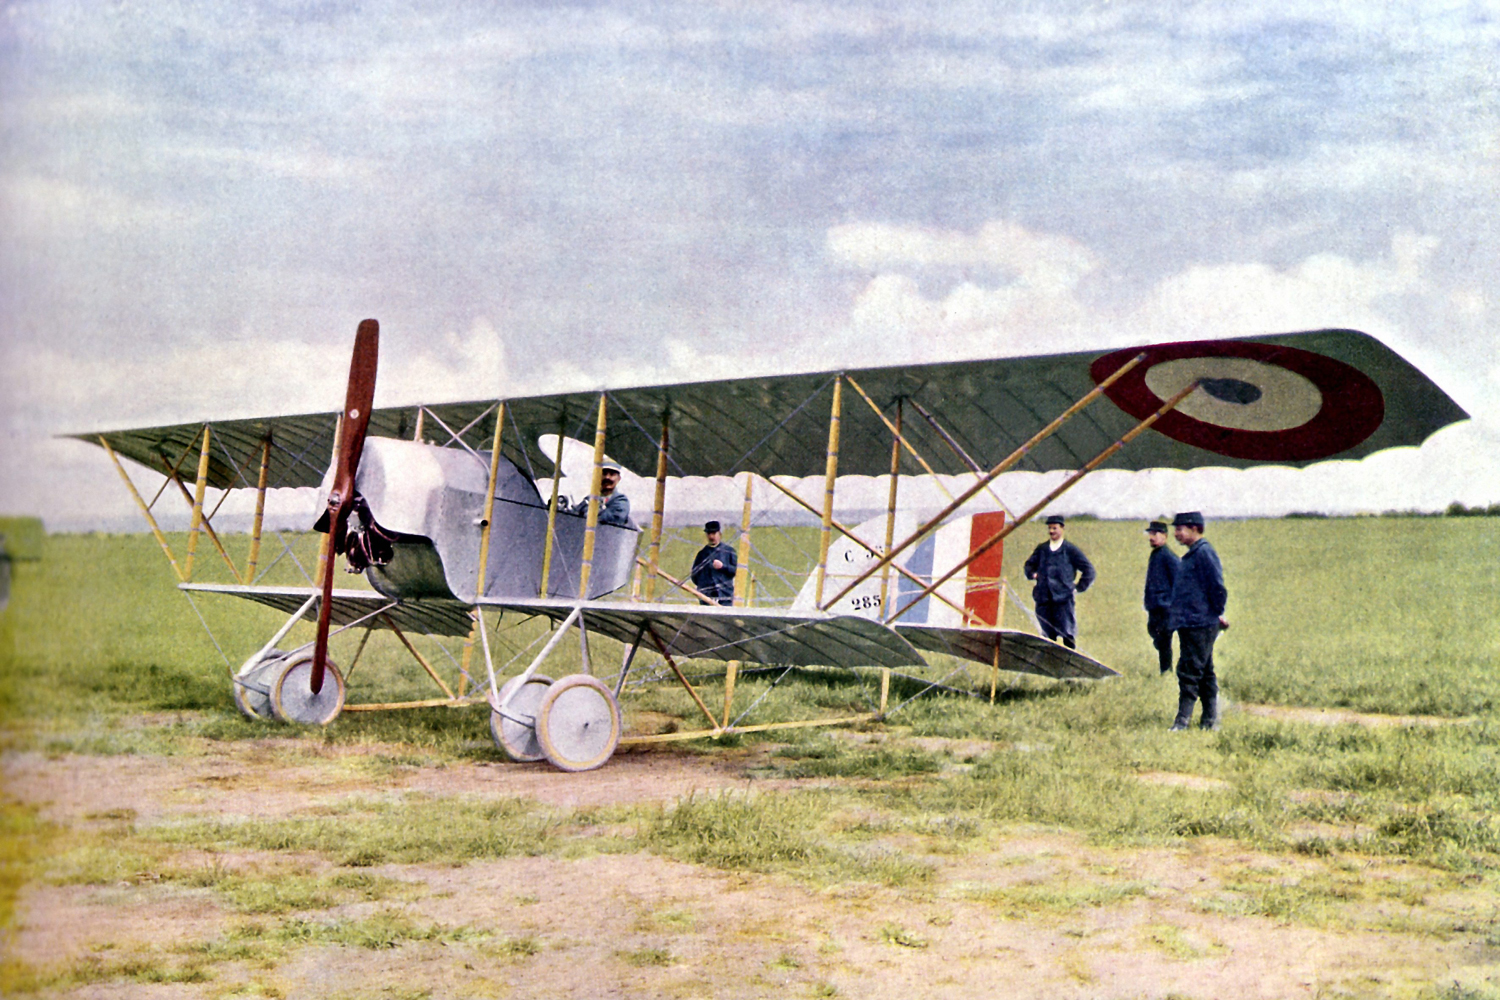 A Nieuport 10 biplane during the Battle of the Marne, east of Paris, 
                              September 1914.